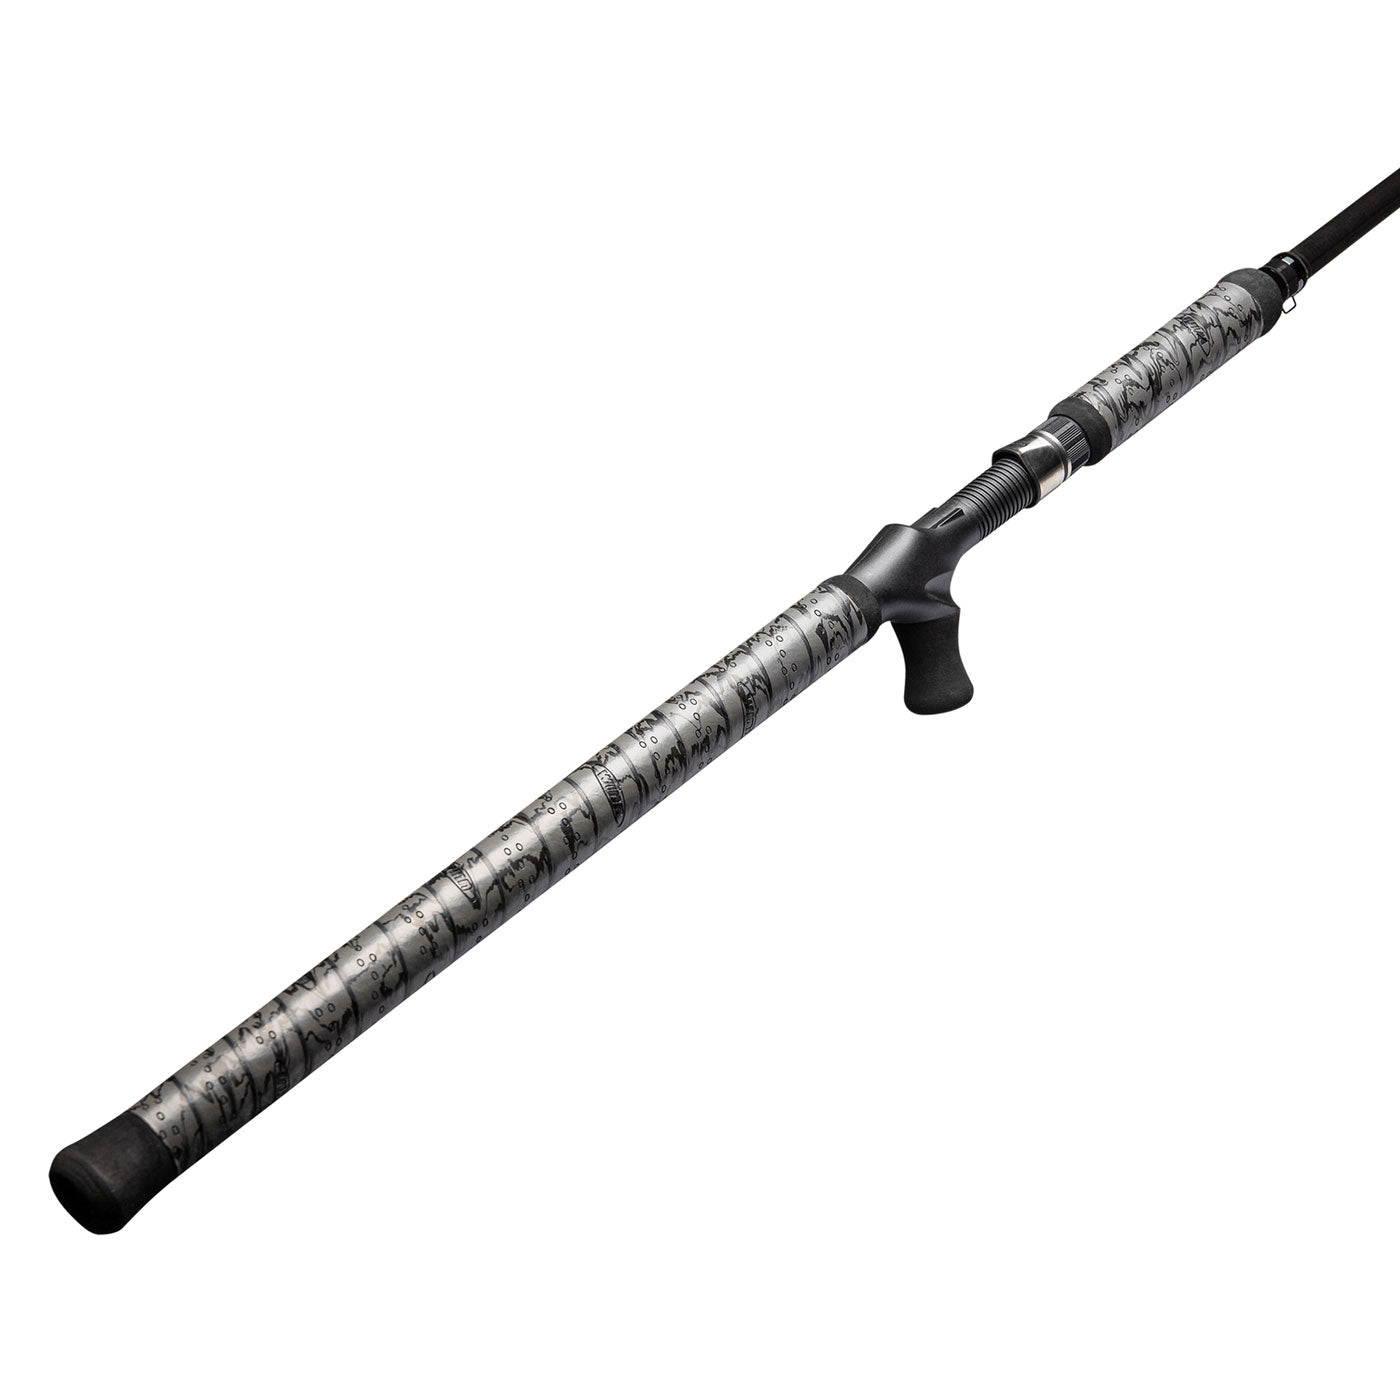 Vexan and TI PRO Fishing Rods